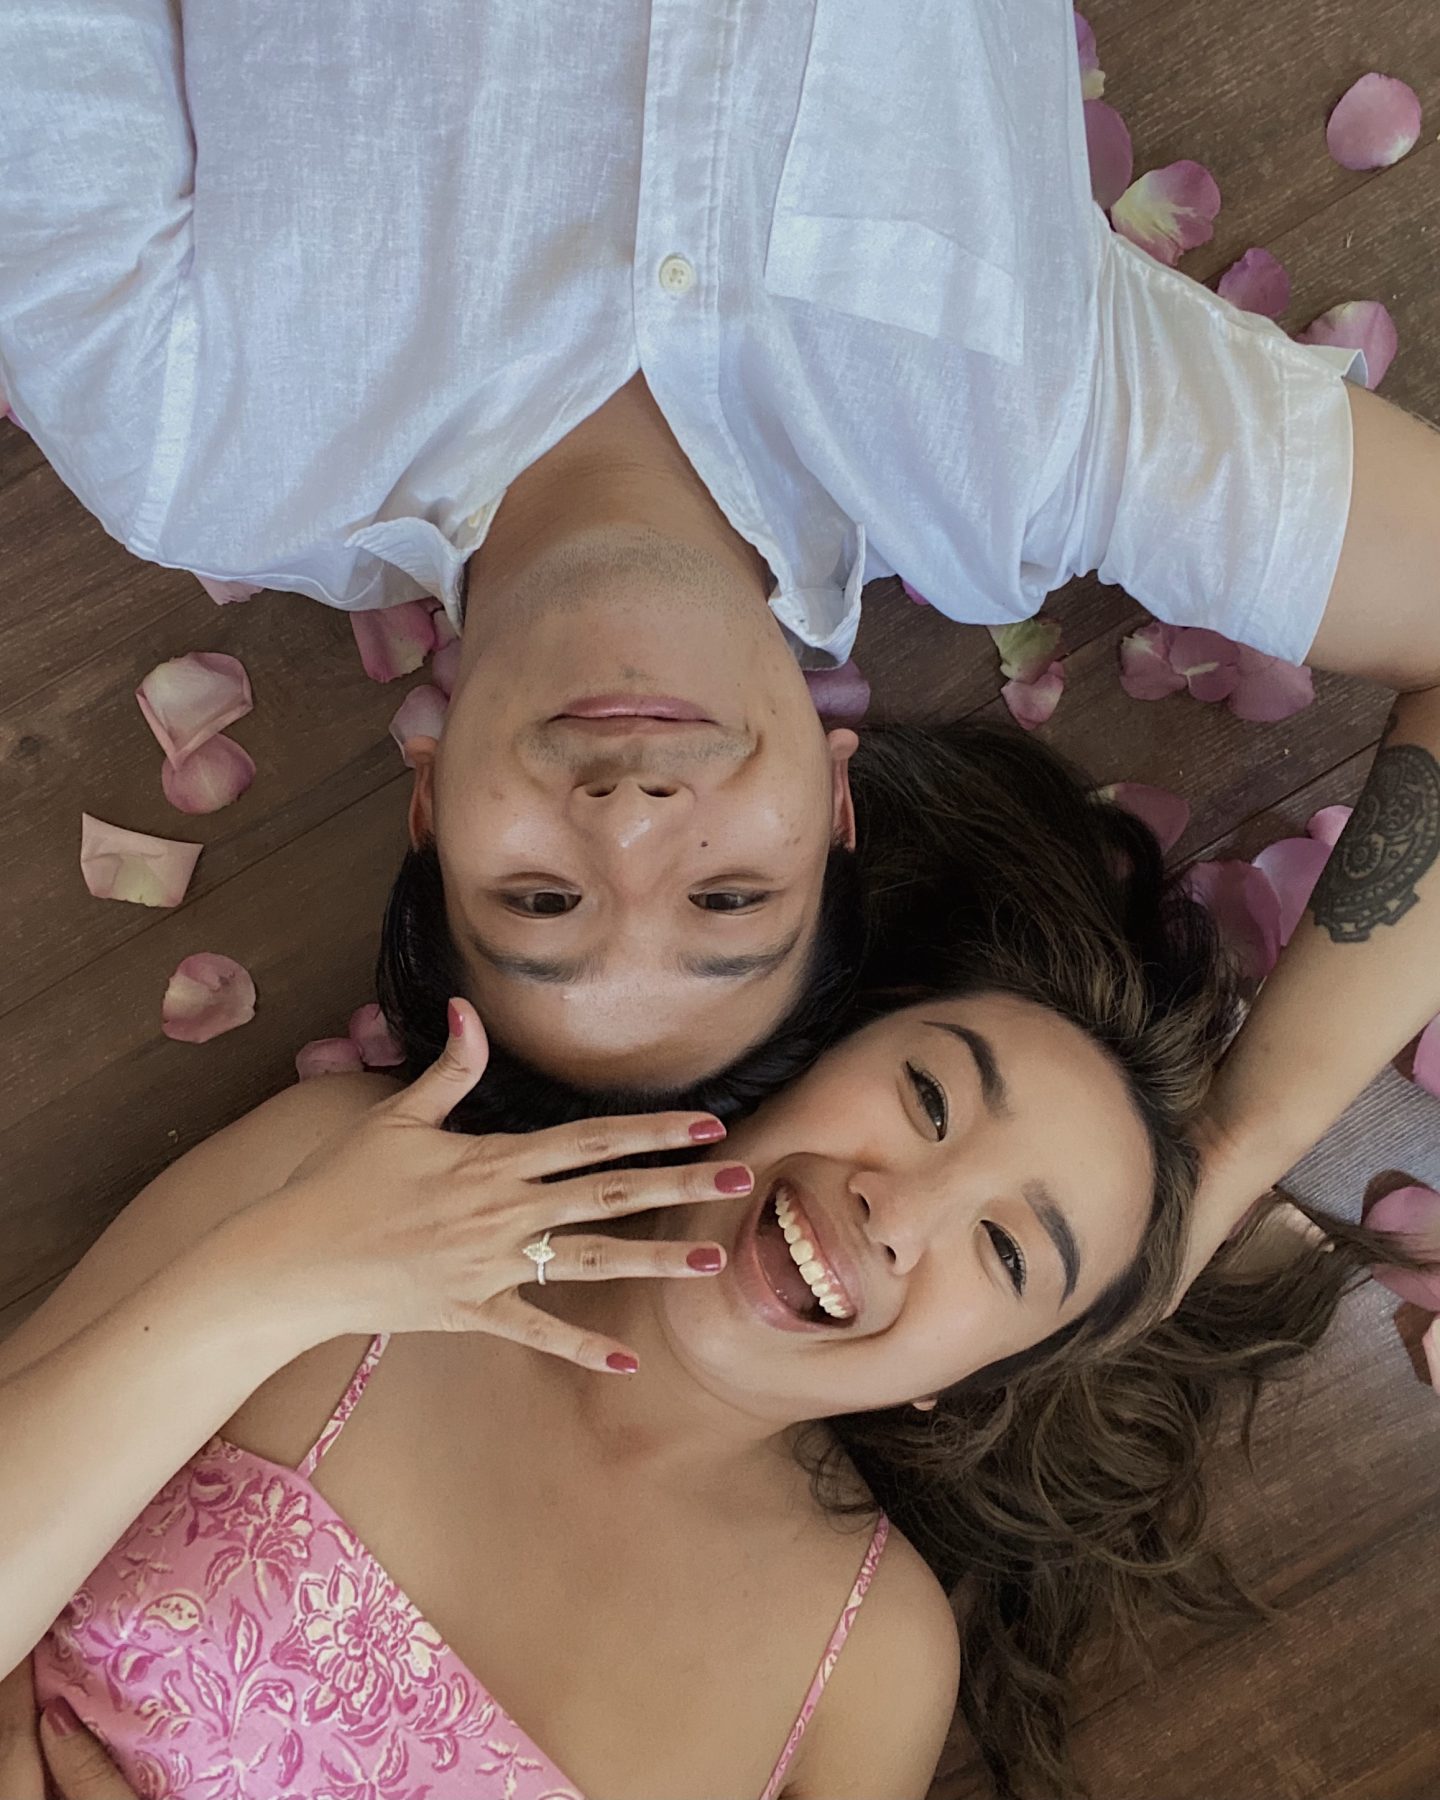 Girl and boy lying down on floor with girl showing her engagement ring